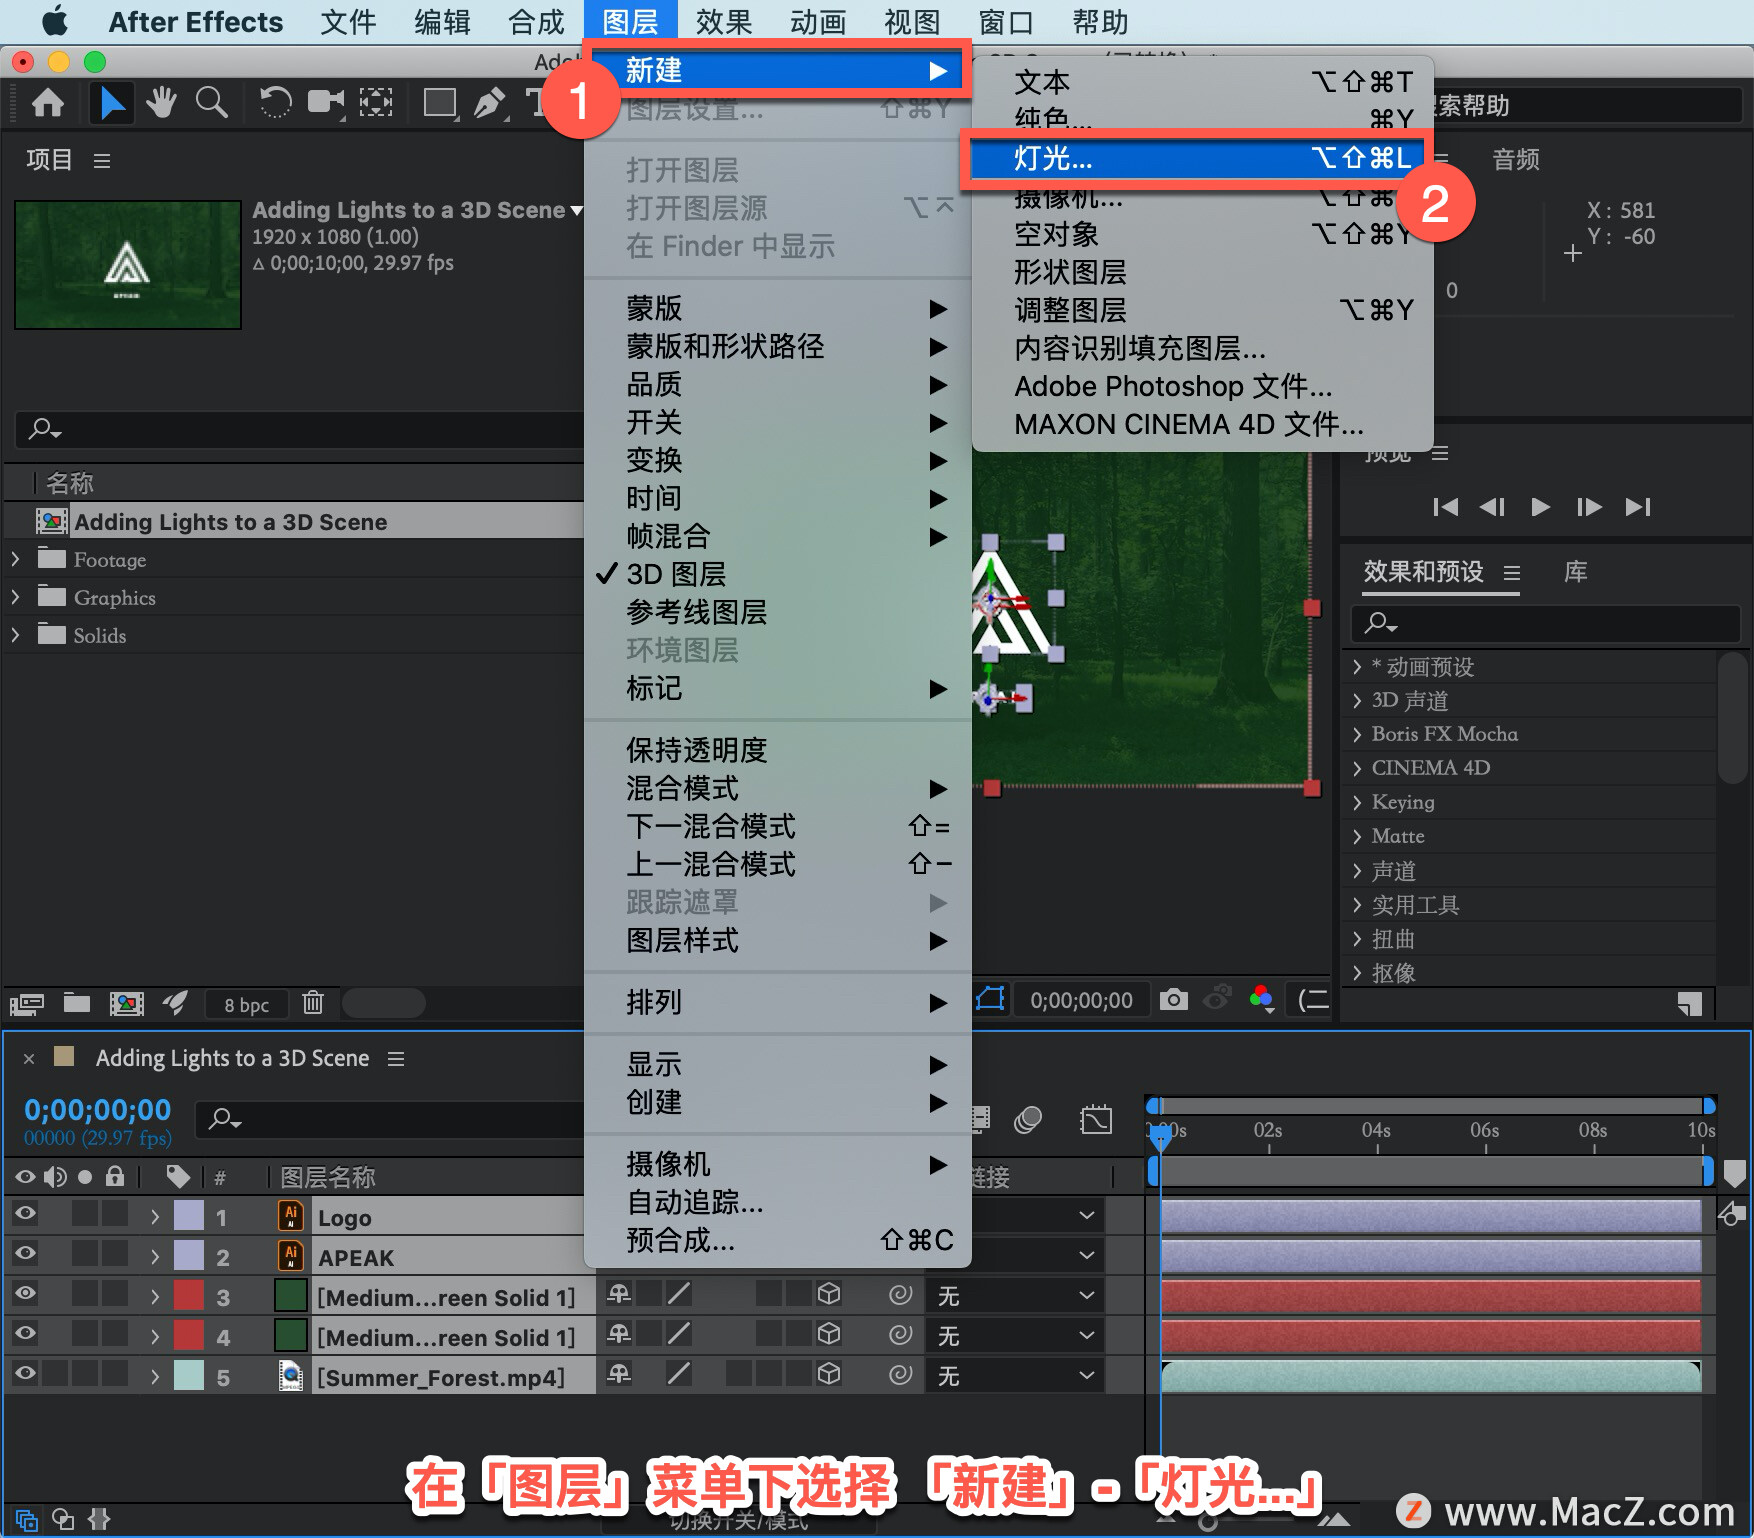 After Effects 教程「54」，如何在 After Effects 中将灯光添加到 3D 场景？